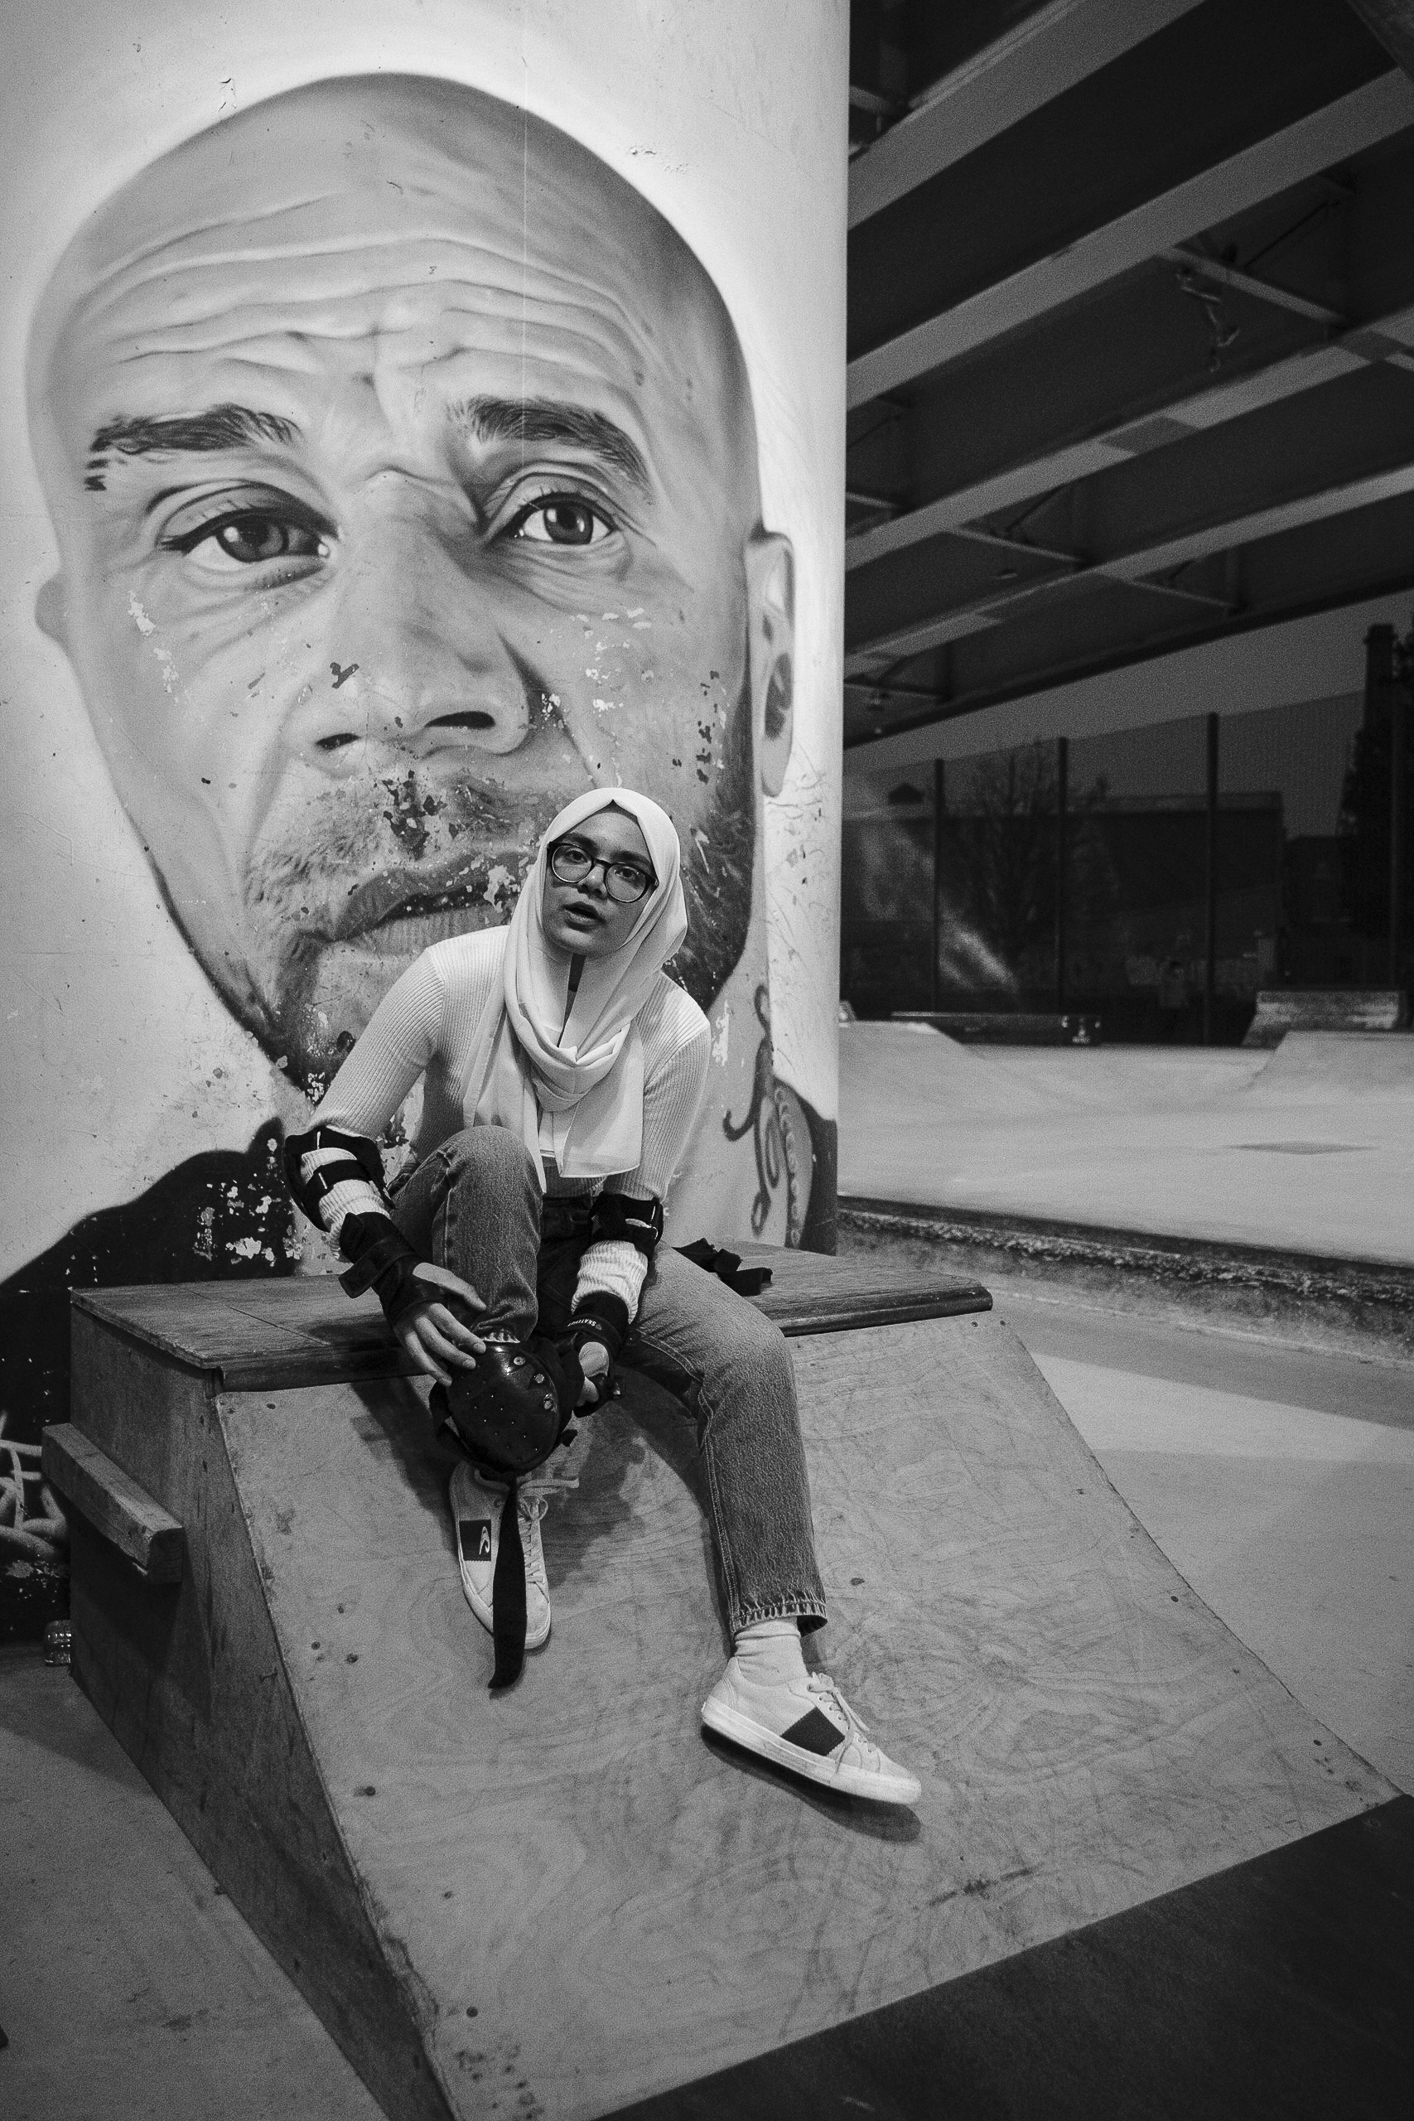 A woman sitting down holding a skateboard with a large image of a man behind her.